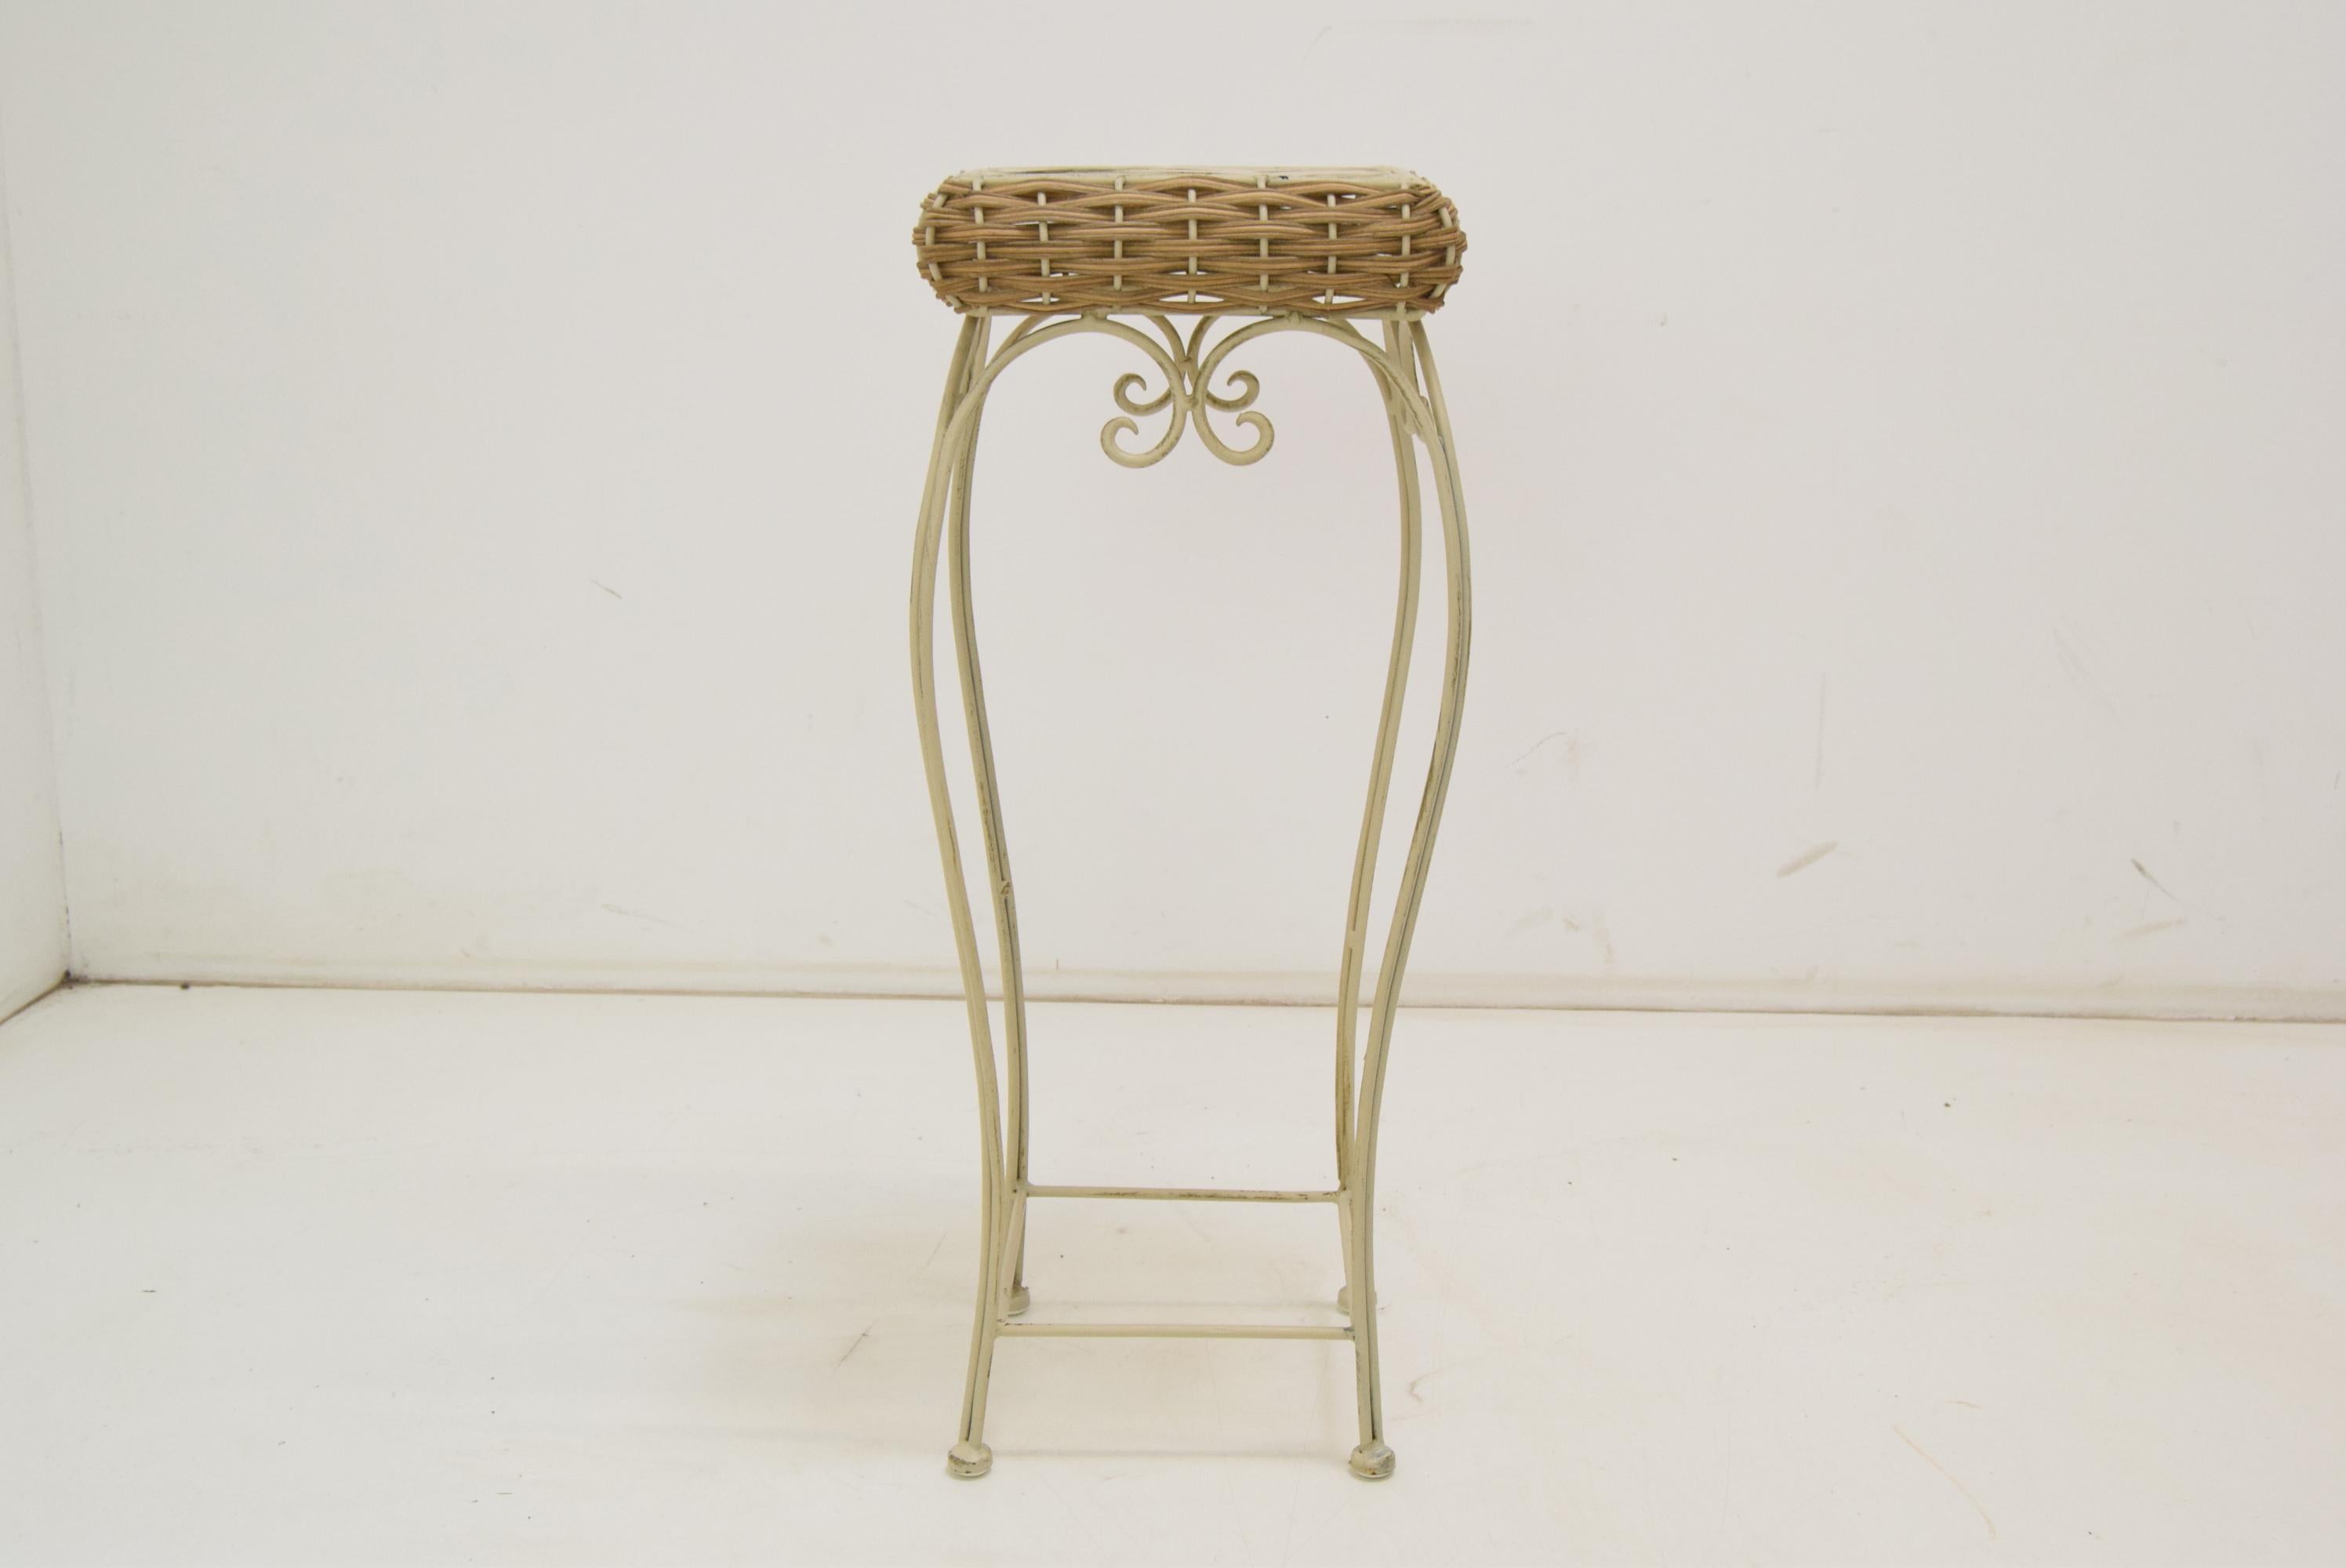 
Made in Czechoslovakia
Made of Metal,Rattan
With aged patina
Good Original condition